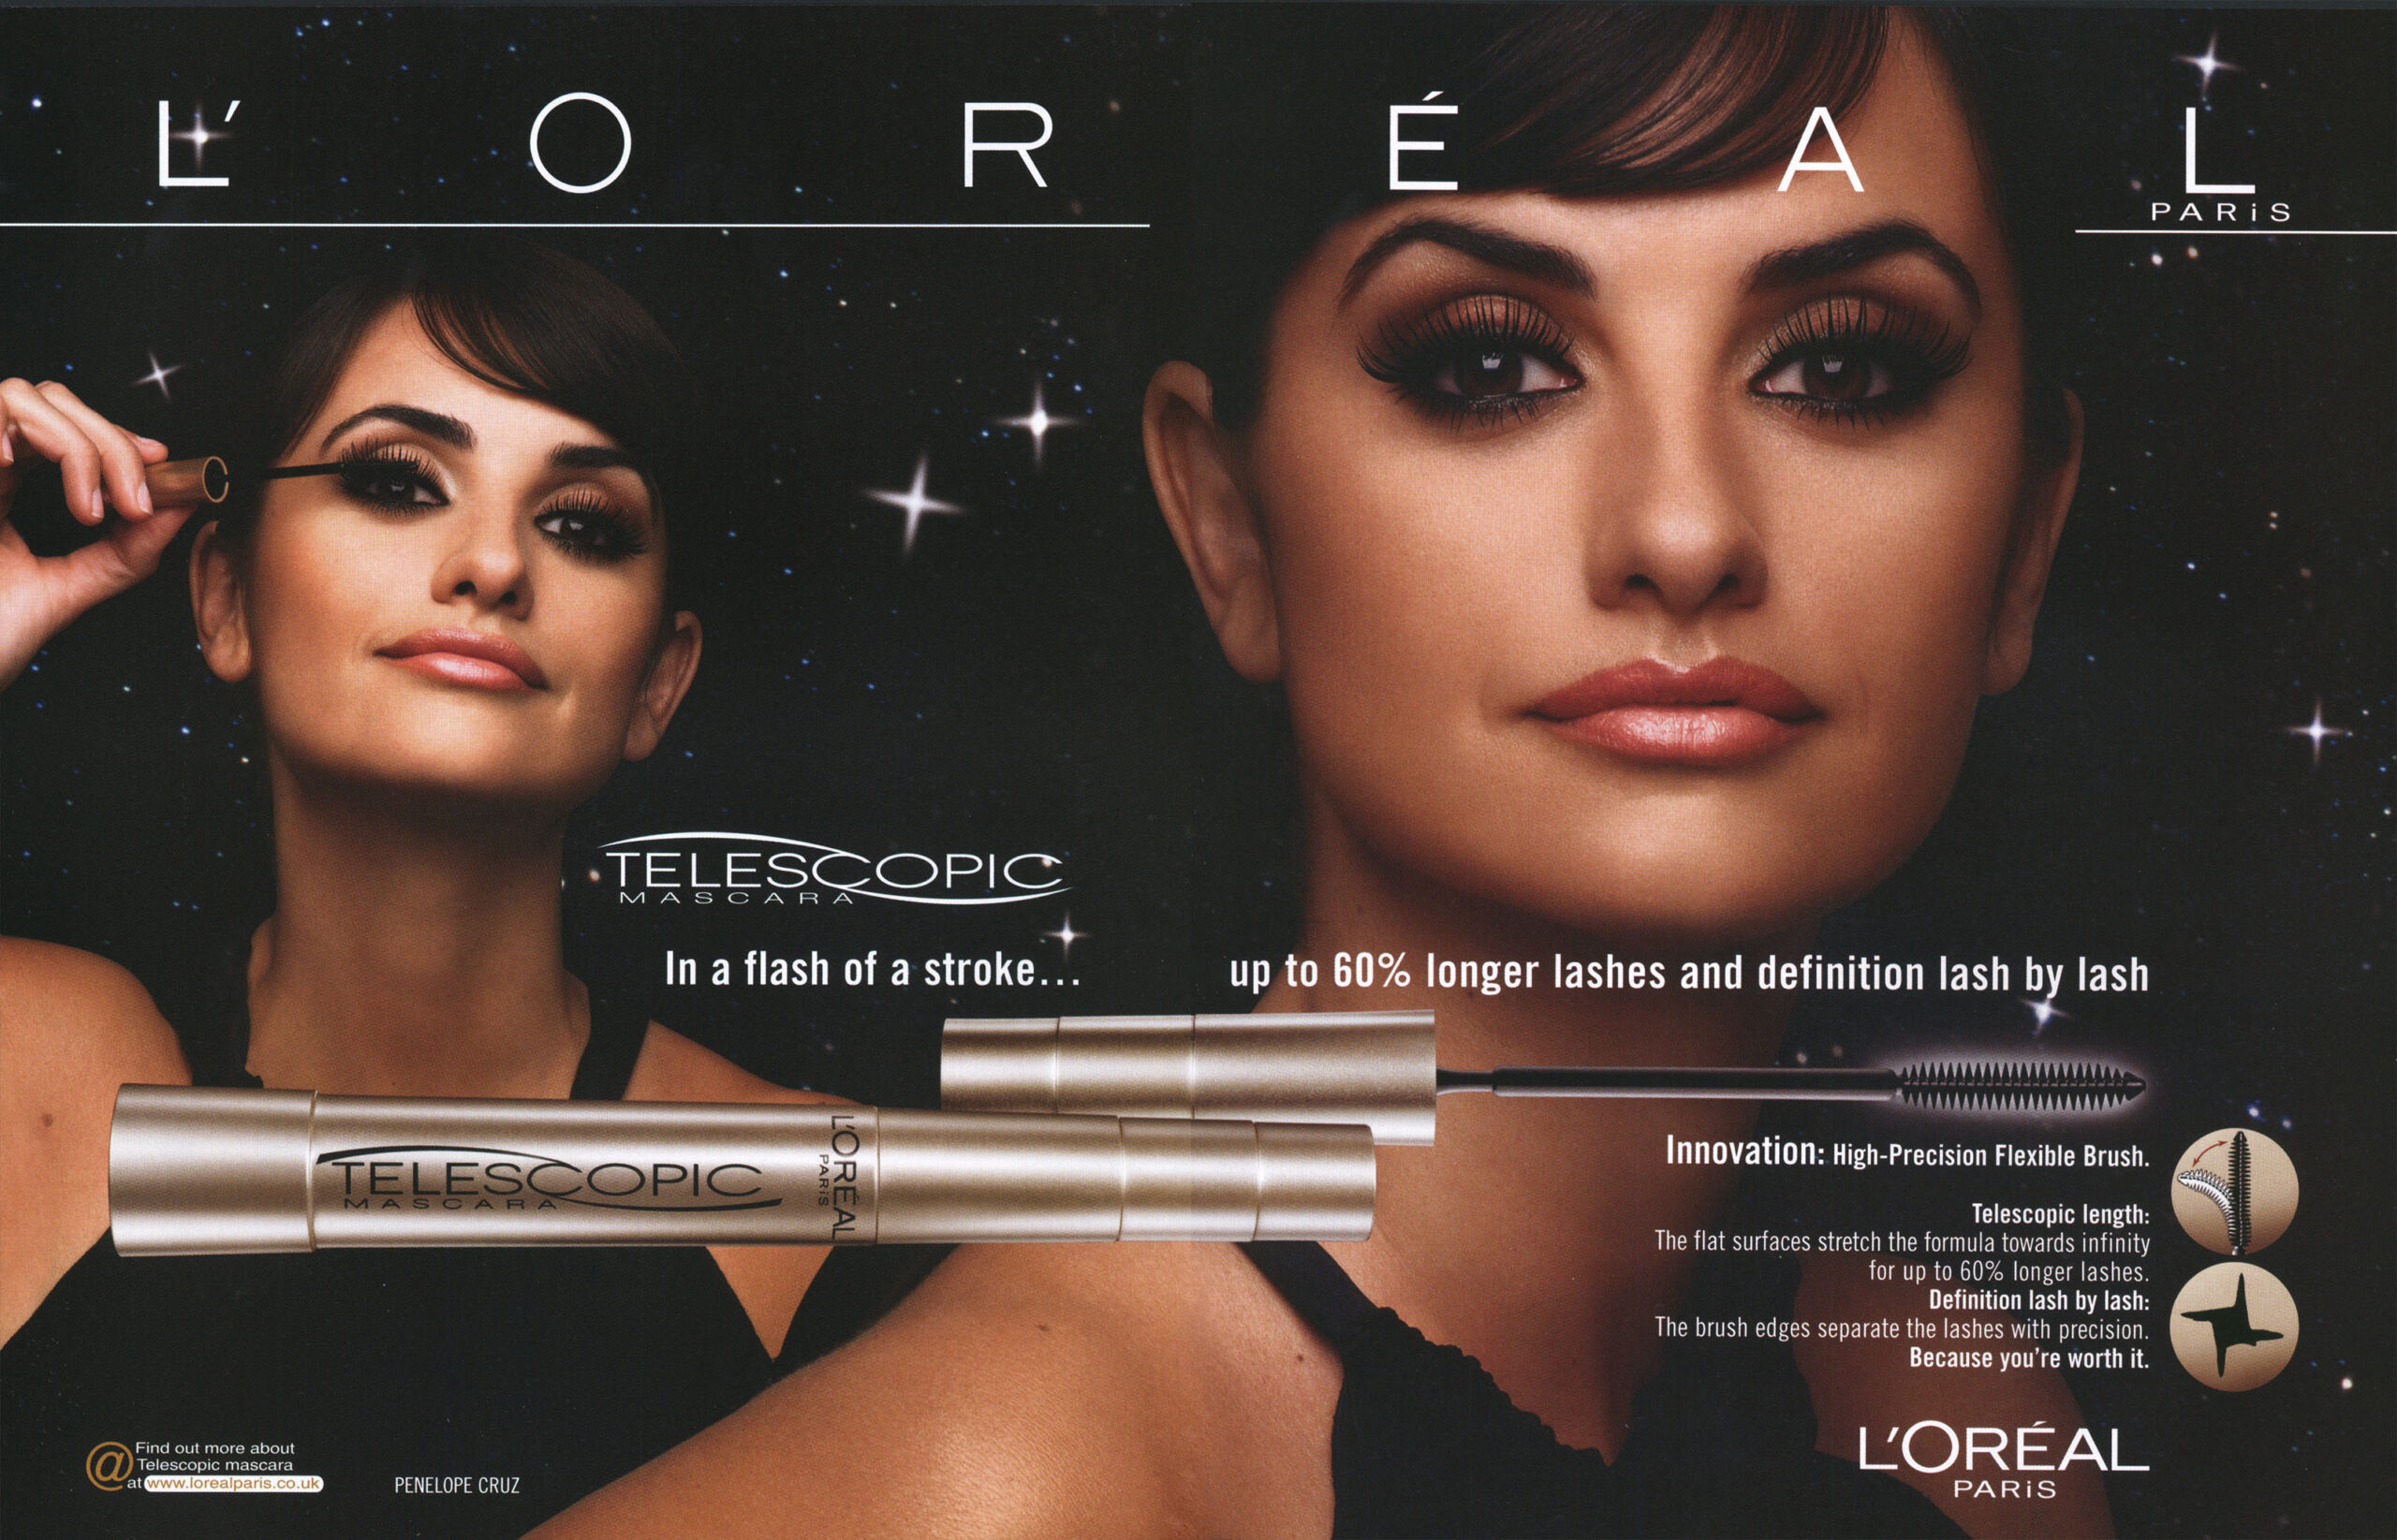 Penelope Cruz earns aound £1.5million a year endorsing shampoo, skin care and make-up products for L’Oreal